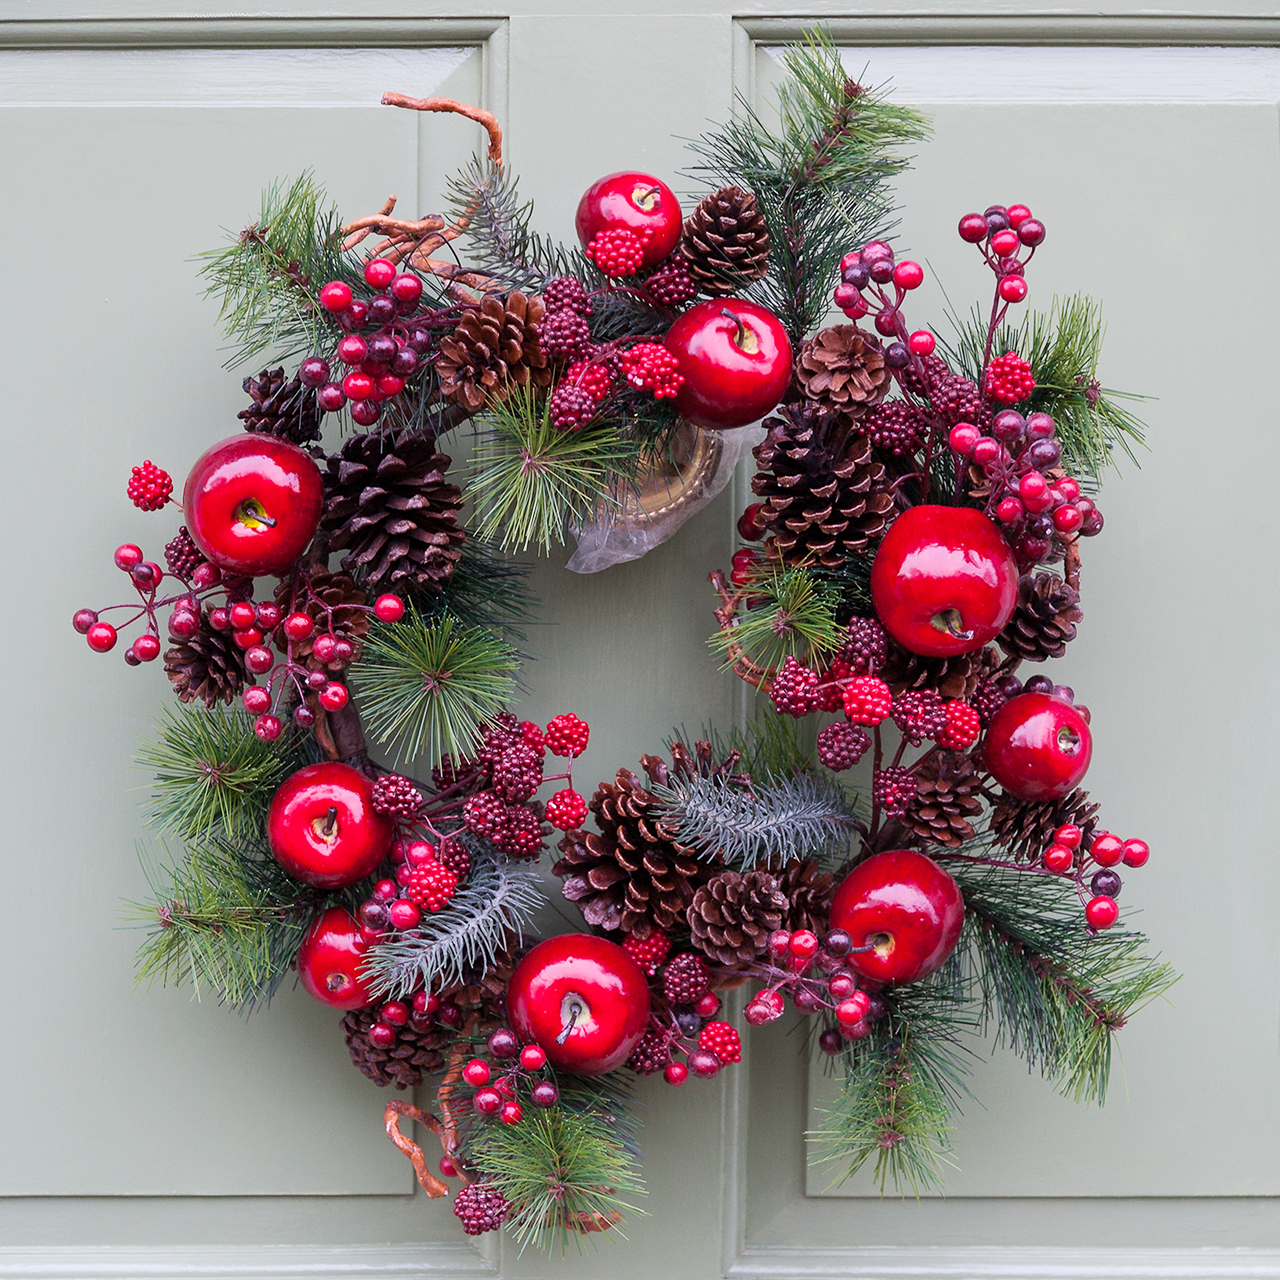 Christmas wreath with pine branches, pinecones and apples